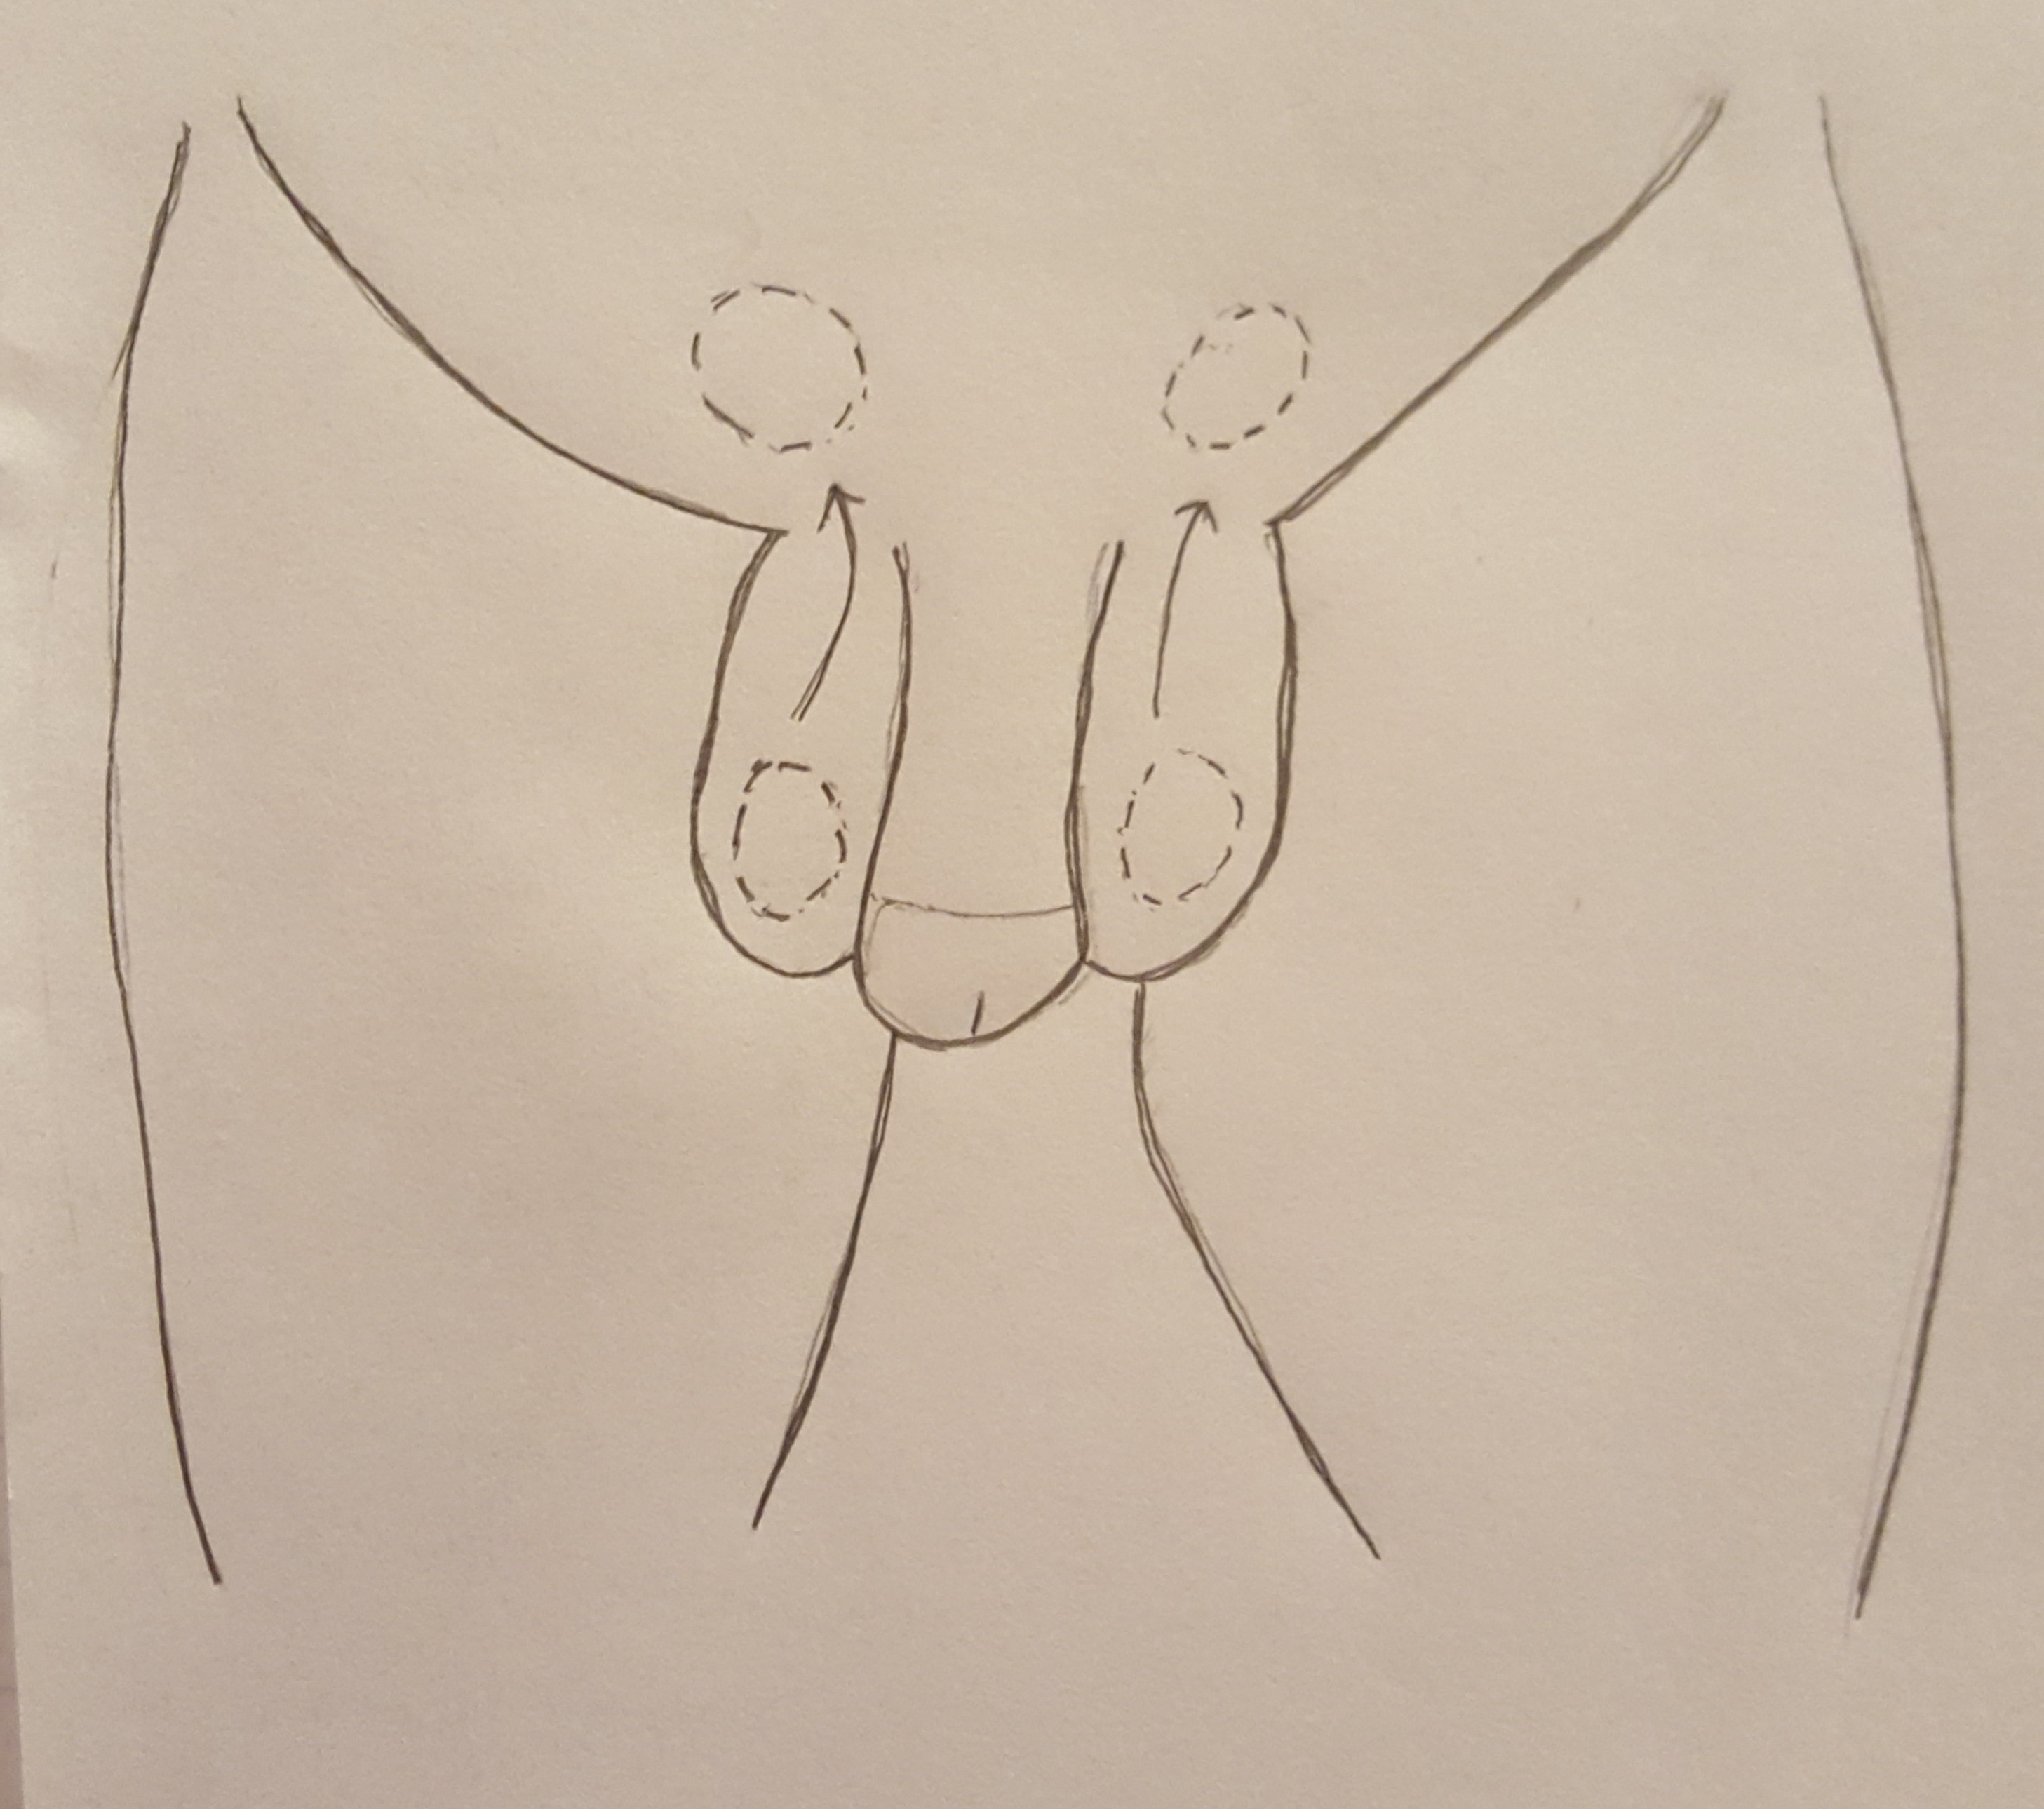 A drawing of penis and testicles. Arrows indicate to push each testicle upward into the abdomen to demonstrate the first step of tucking